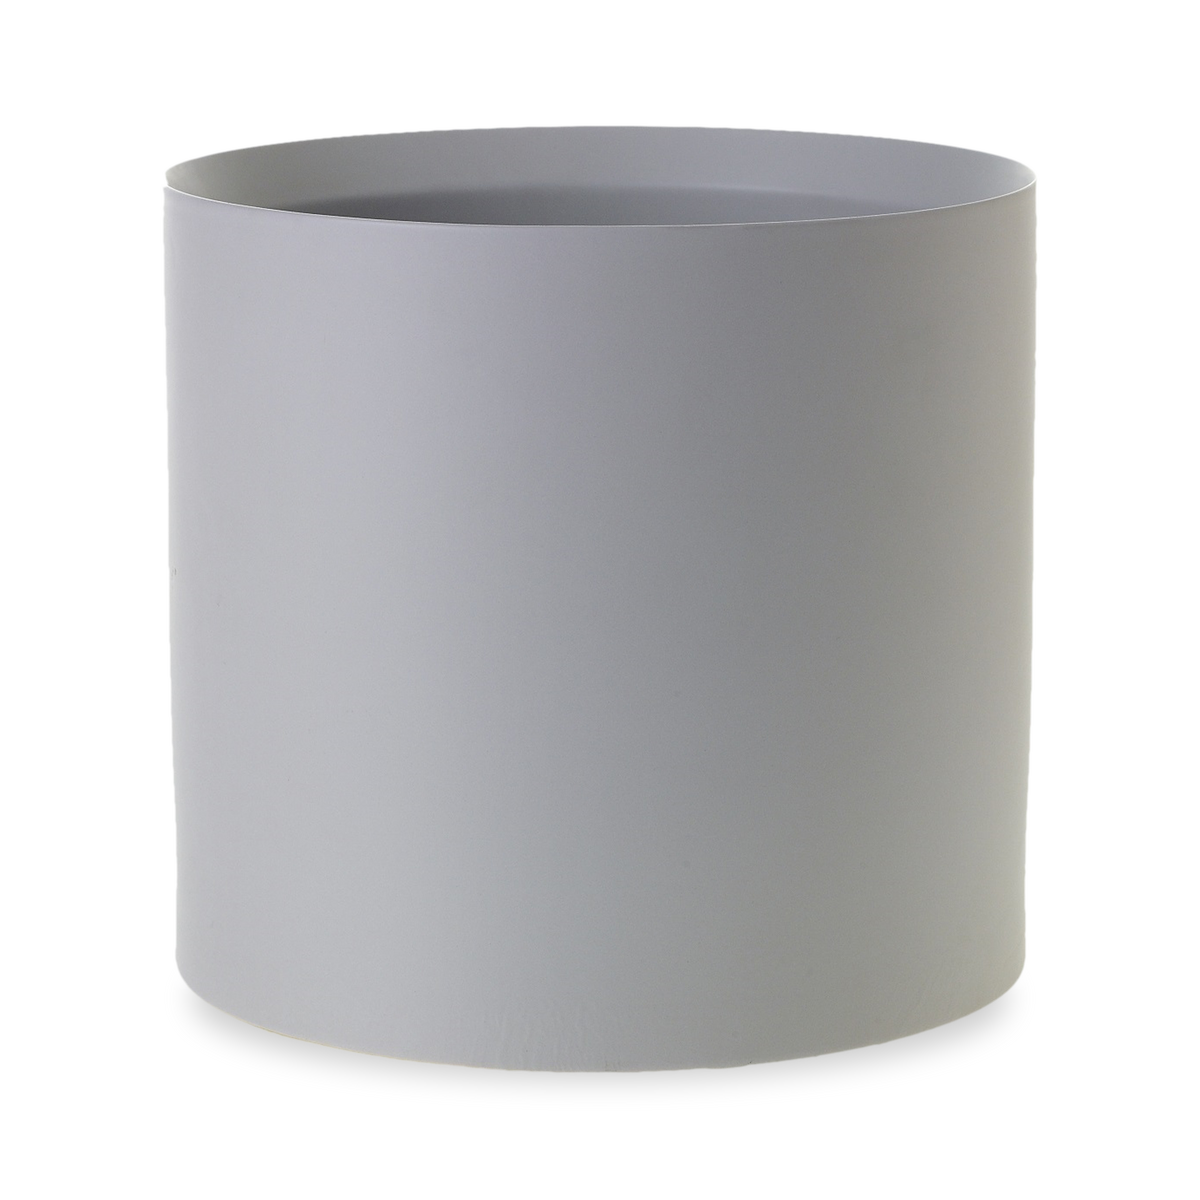 The Neo Pot features simple lines and neutral yet trendy colours made from 100% ceramic.